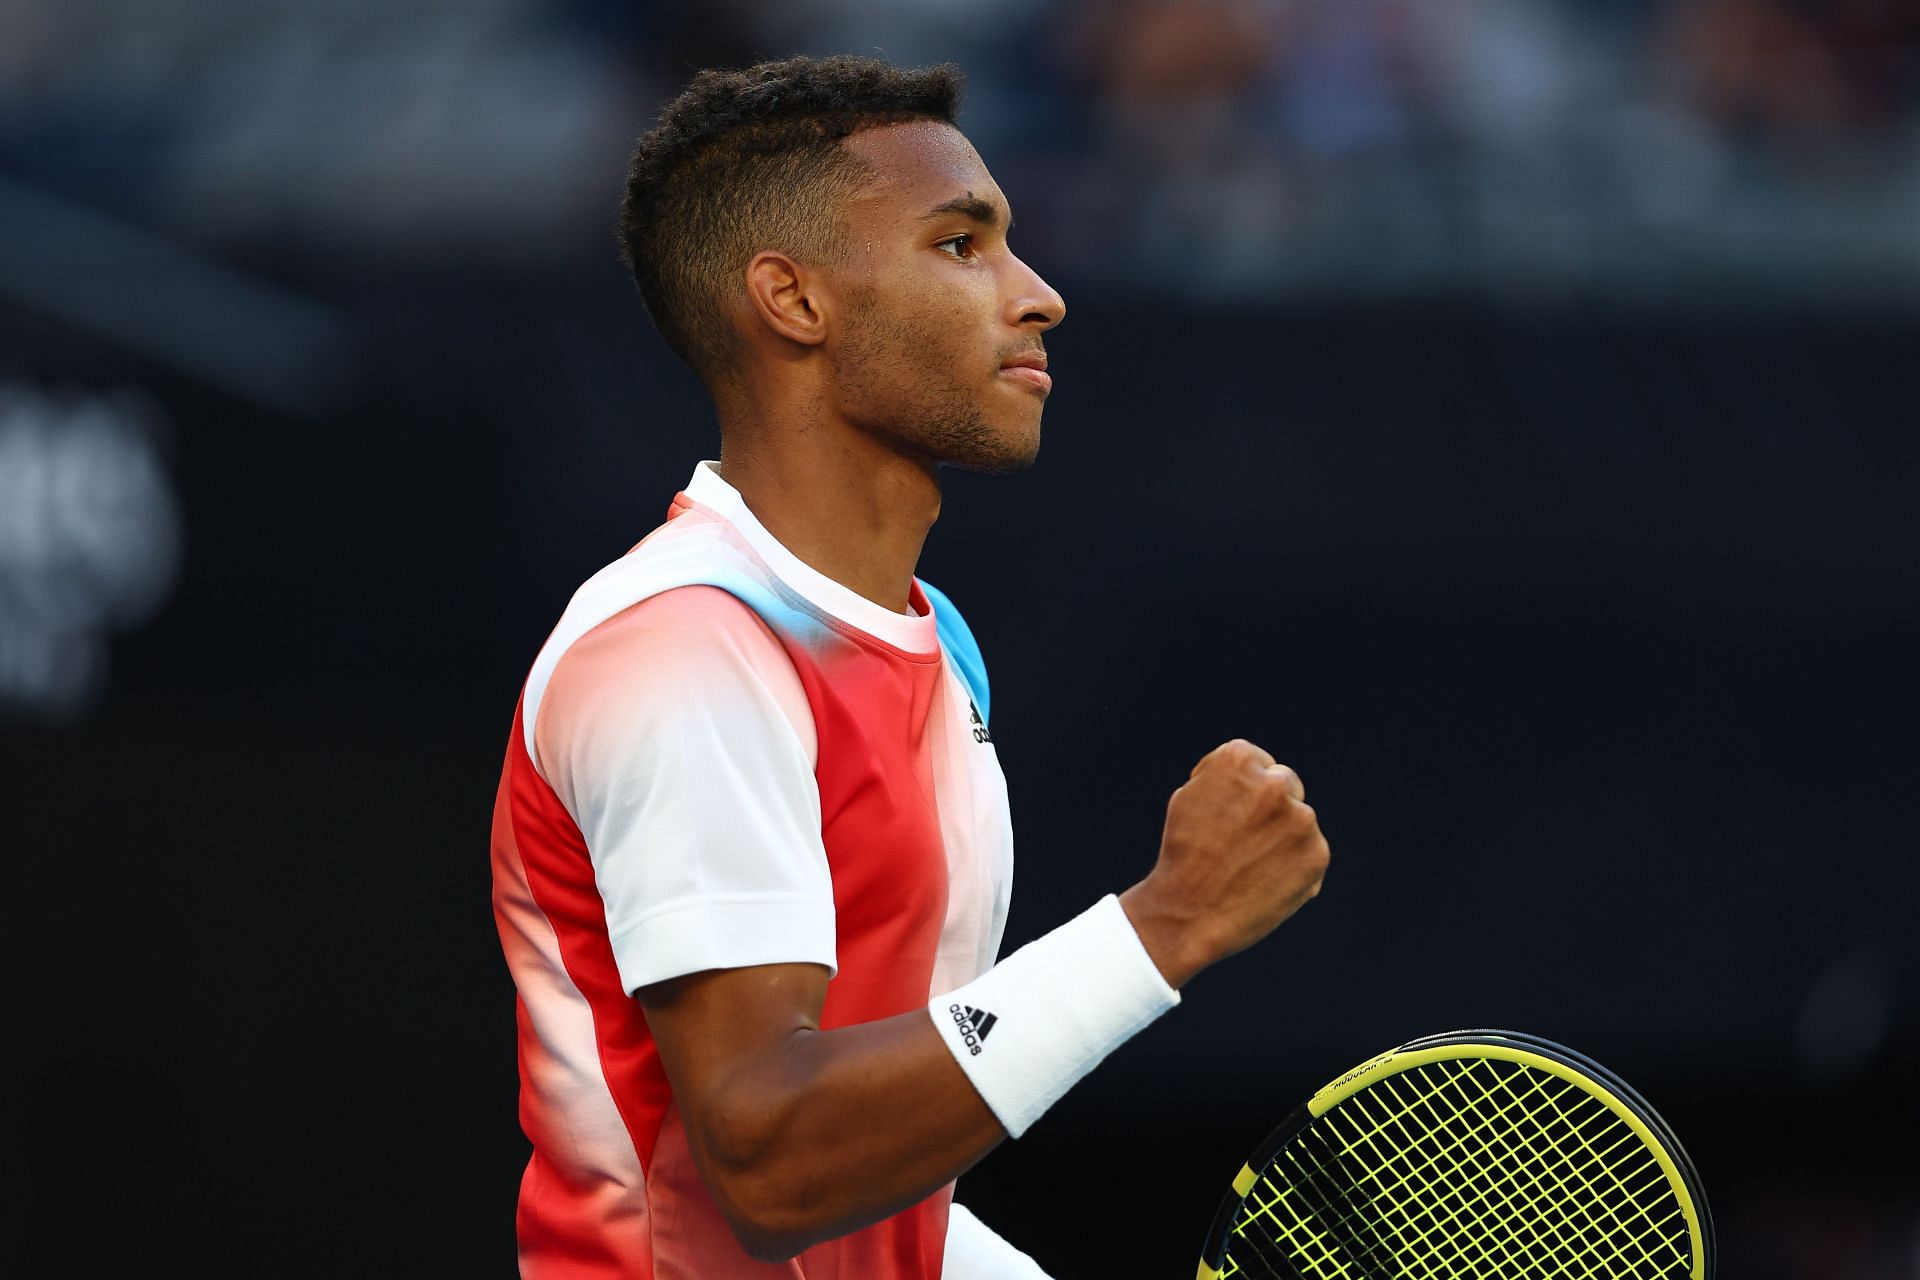 Felix Auger-Aliassime in action at the 2022 Australian Open